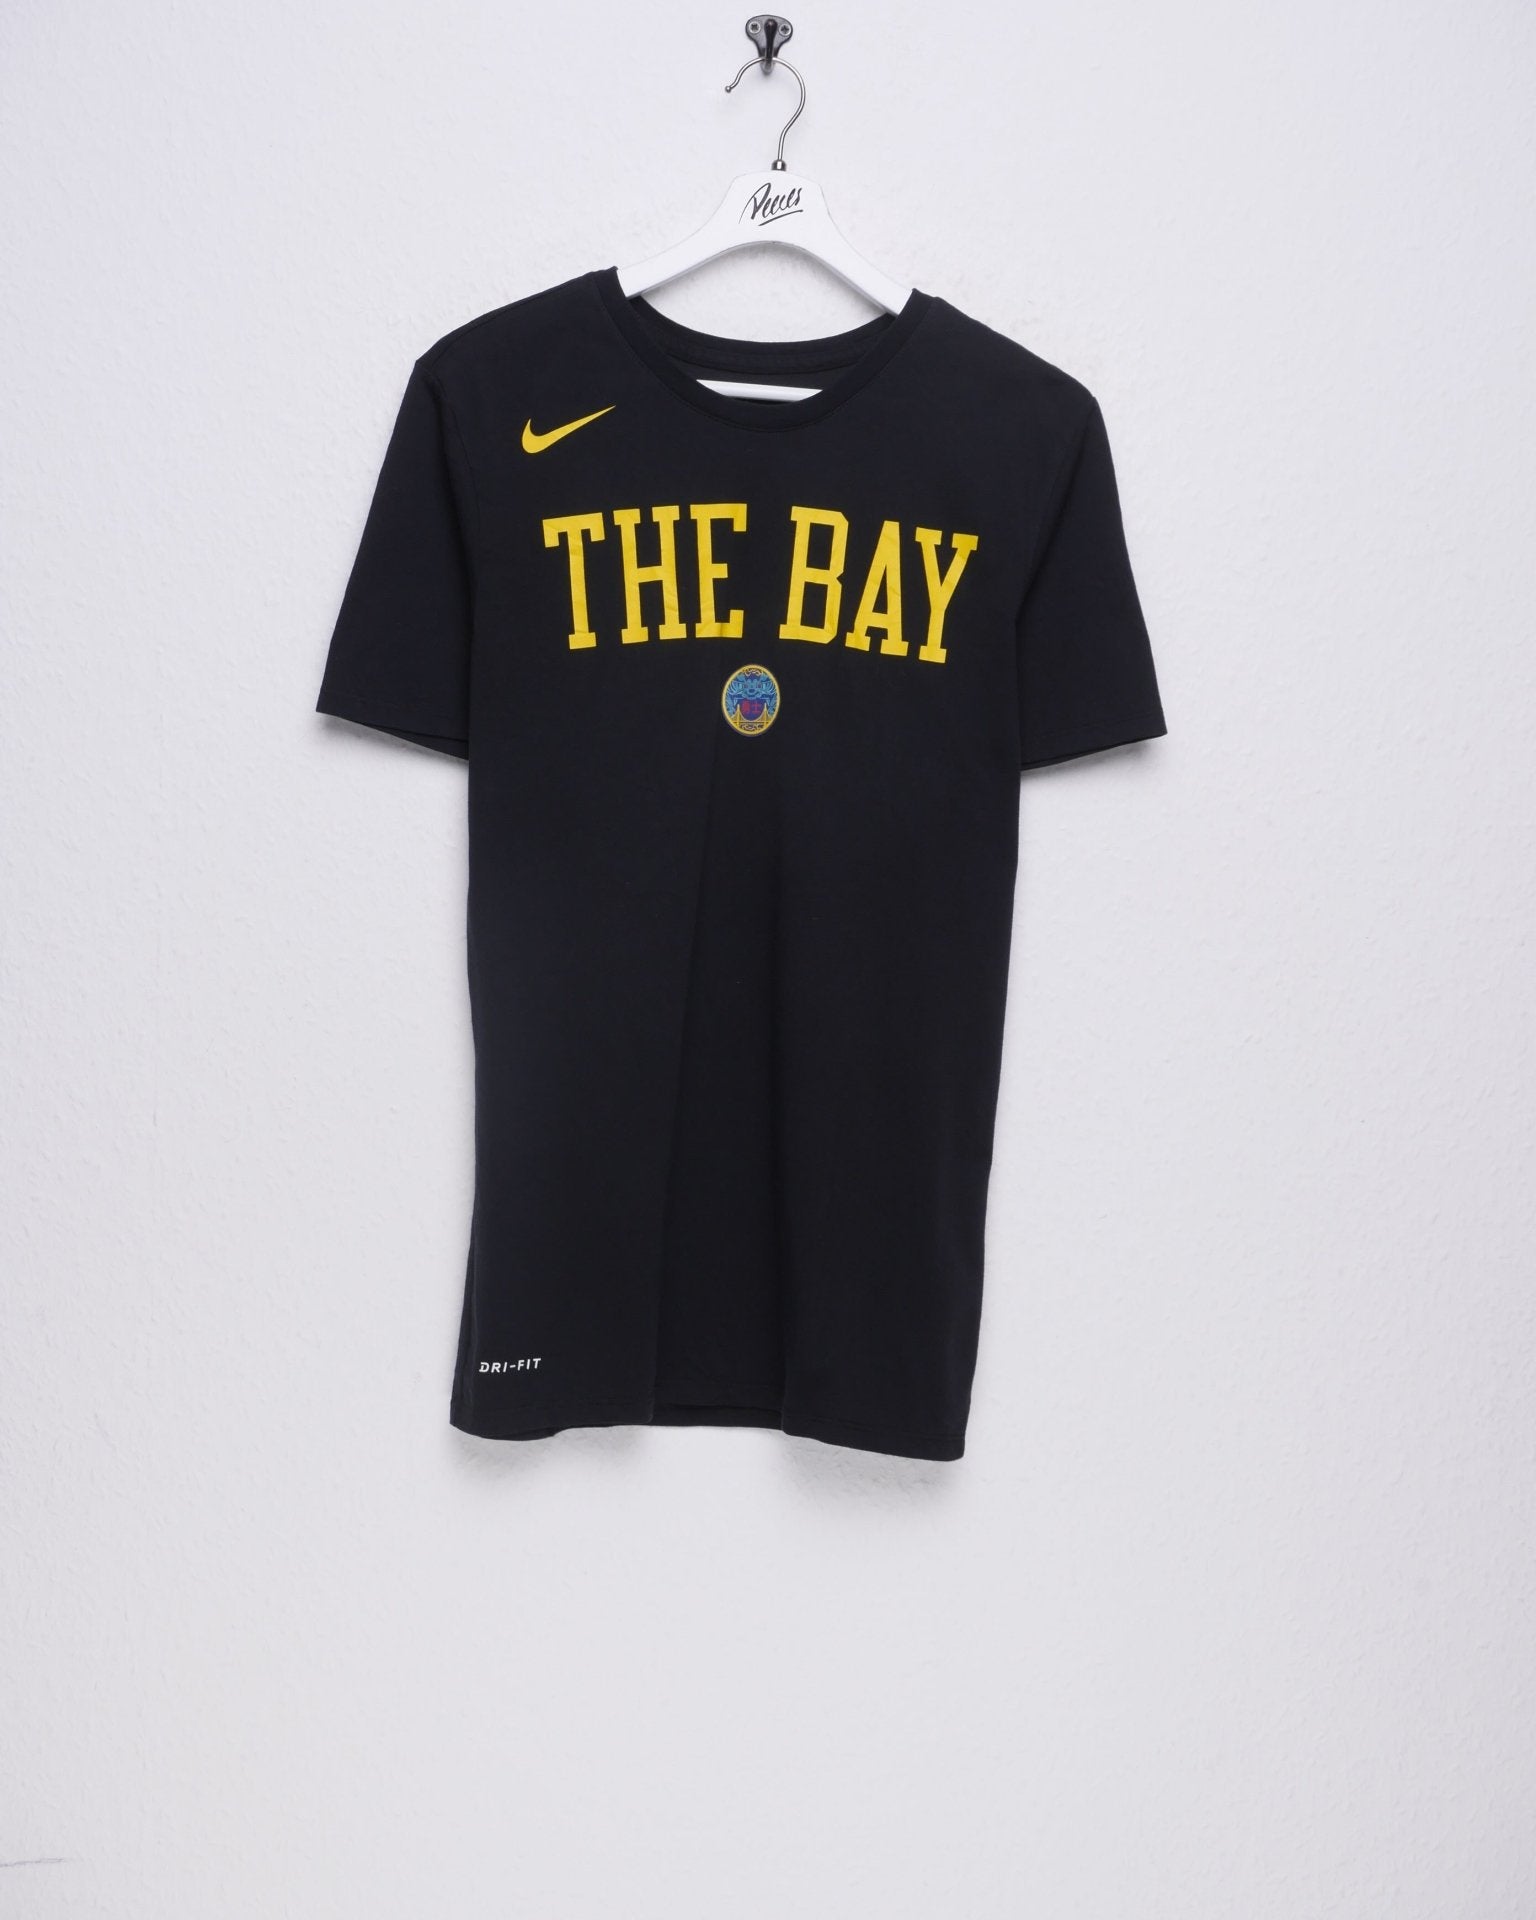 Nike printed The Bay Spellout Vintage Shirt - Peeces